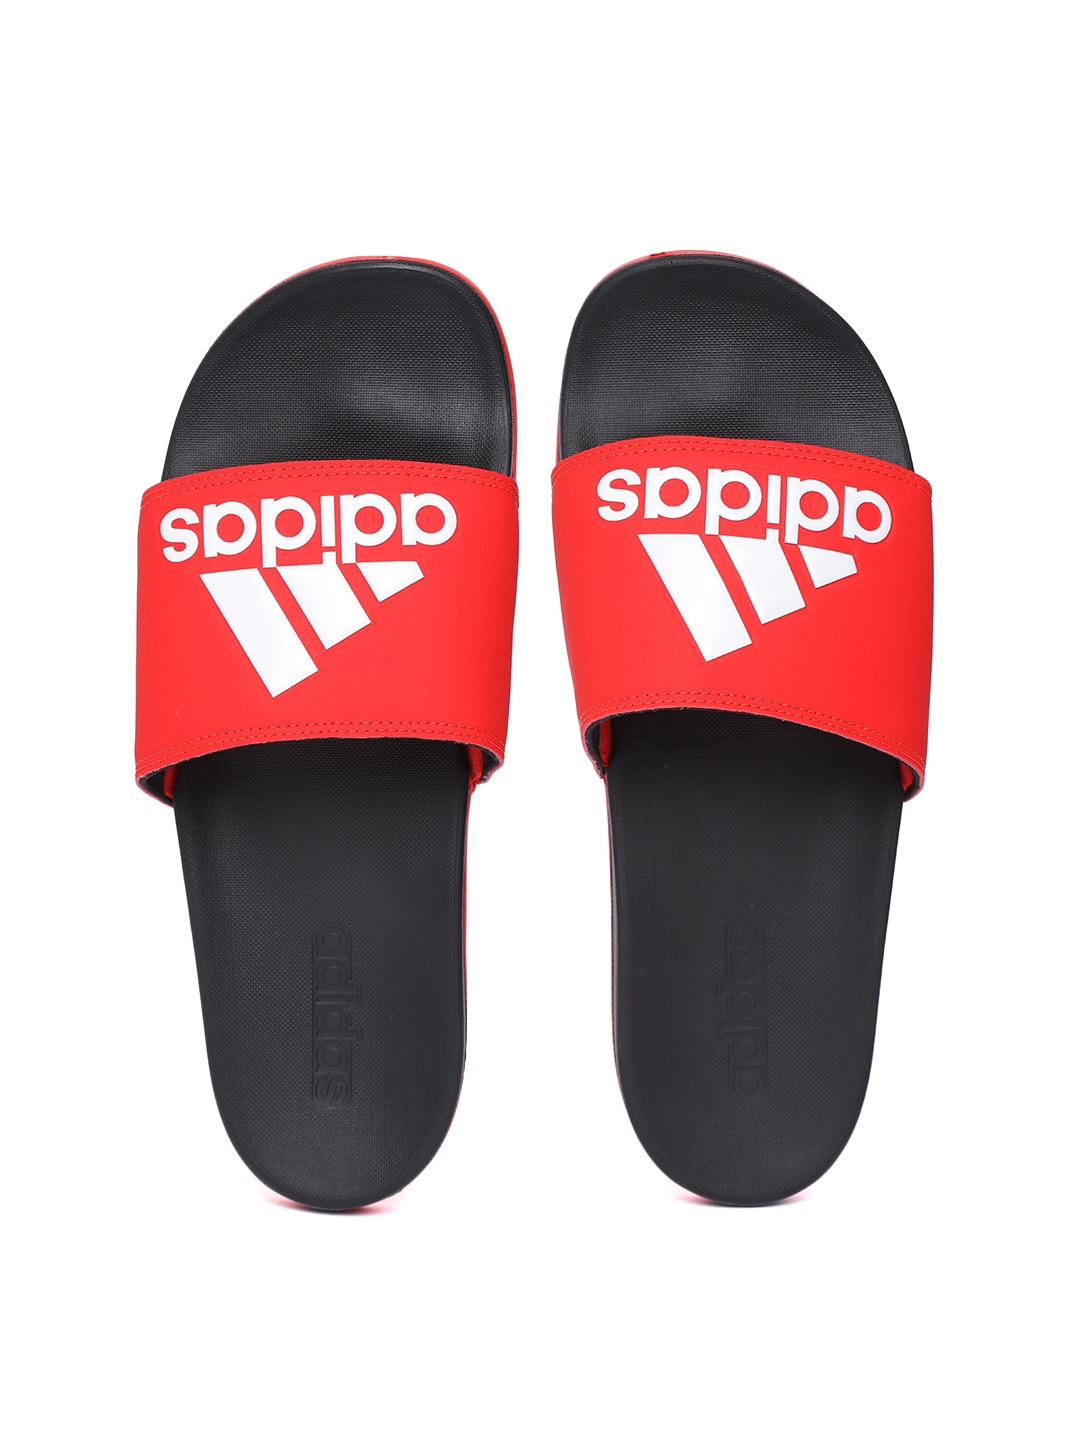 Adidas Adilette Clogs Slide White Unisex Slippers Sandals Casual NWT FY8970  - Đức An Phát